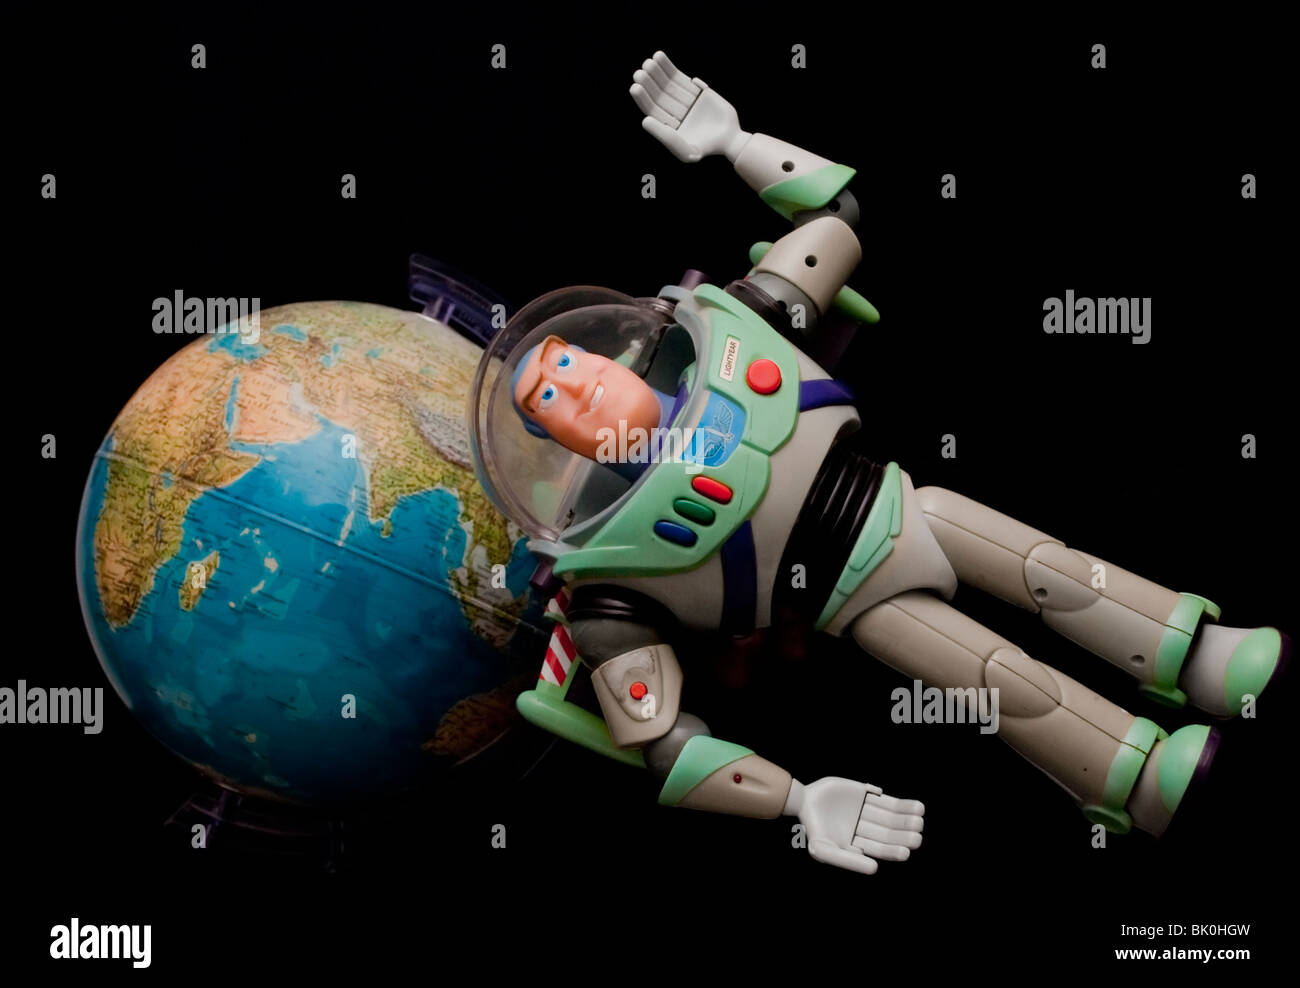 toy buzz lightyear held in front of the earth giving a concept of a space man floating in space Stock Photo